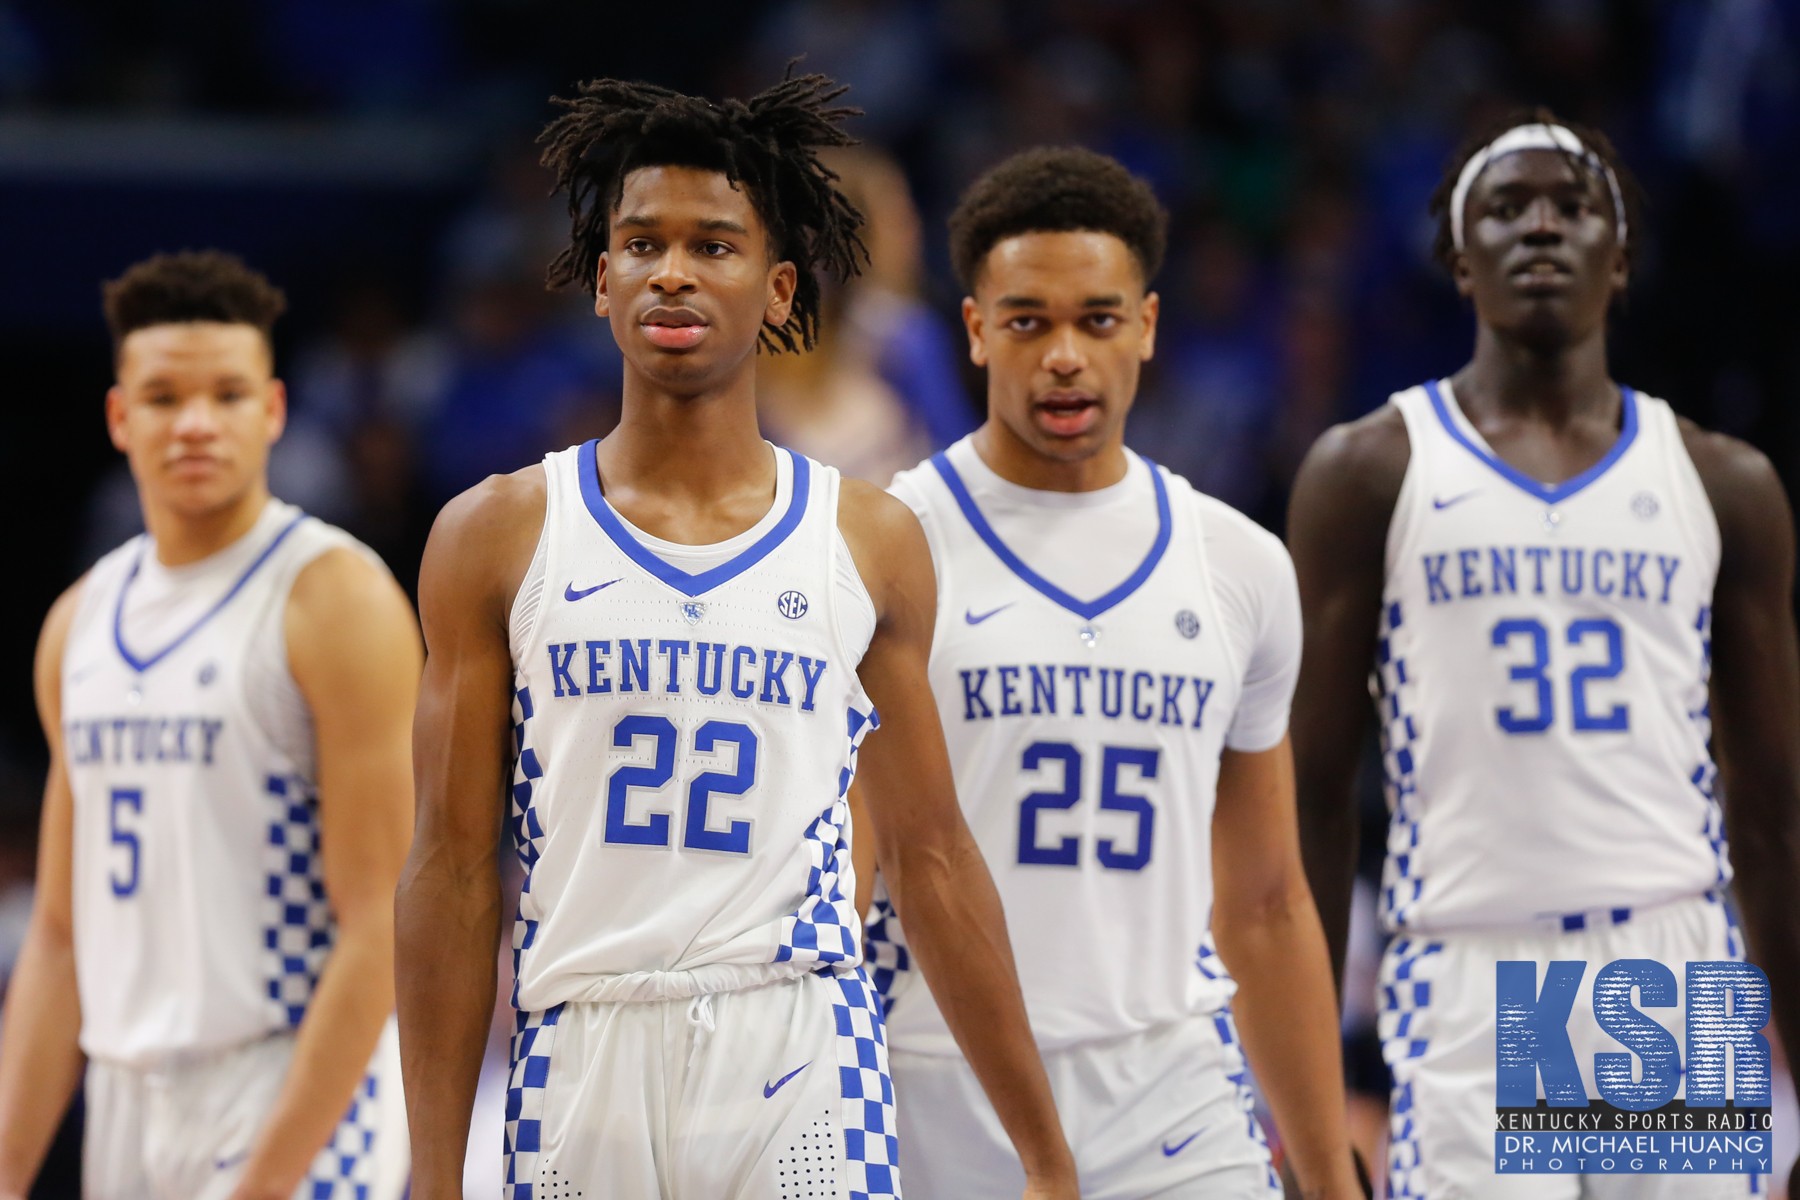 Where Kentucky players rank in ESPN’s Top 100 Draft Prospects